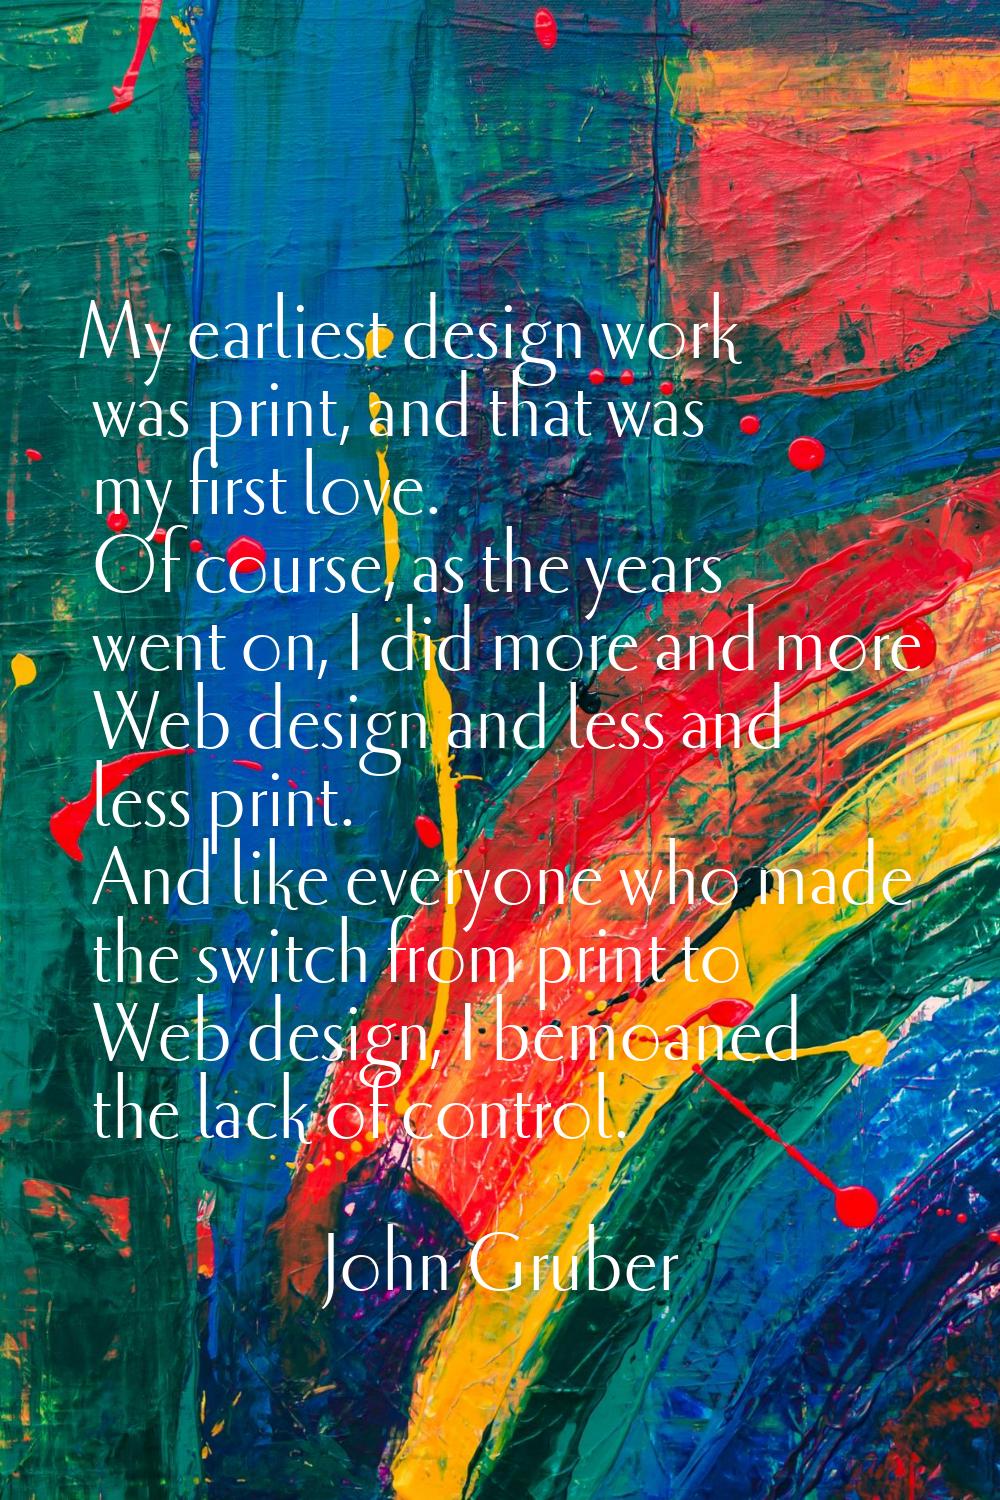 My earliest design work was print, and that was my first love. Of course, as the years went on, I d